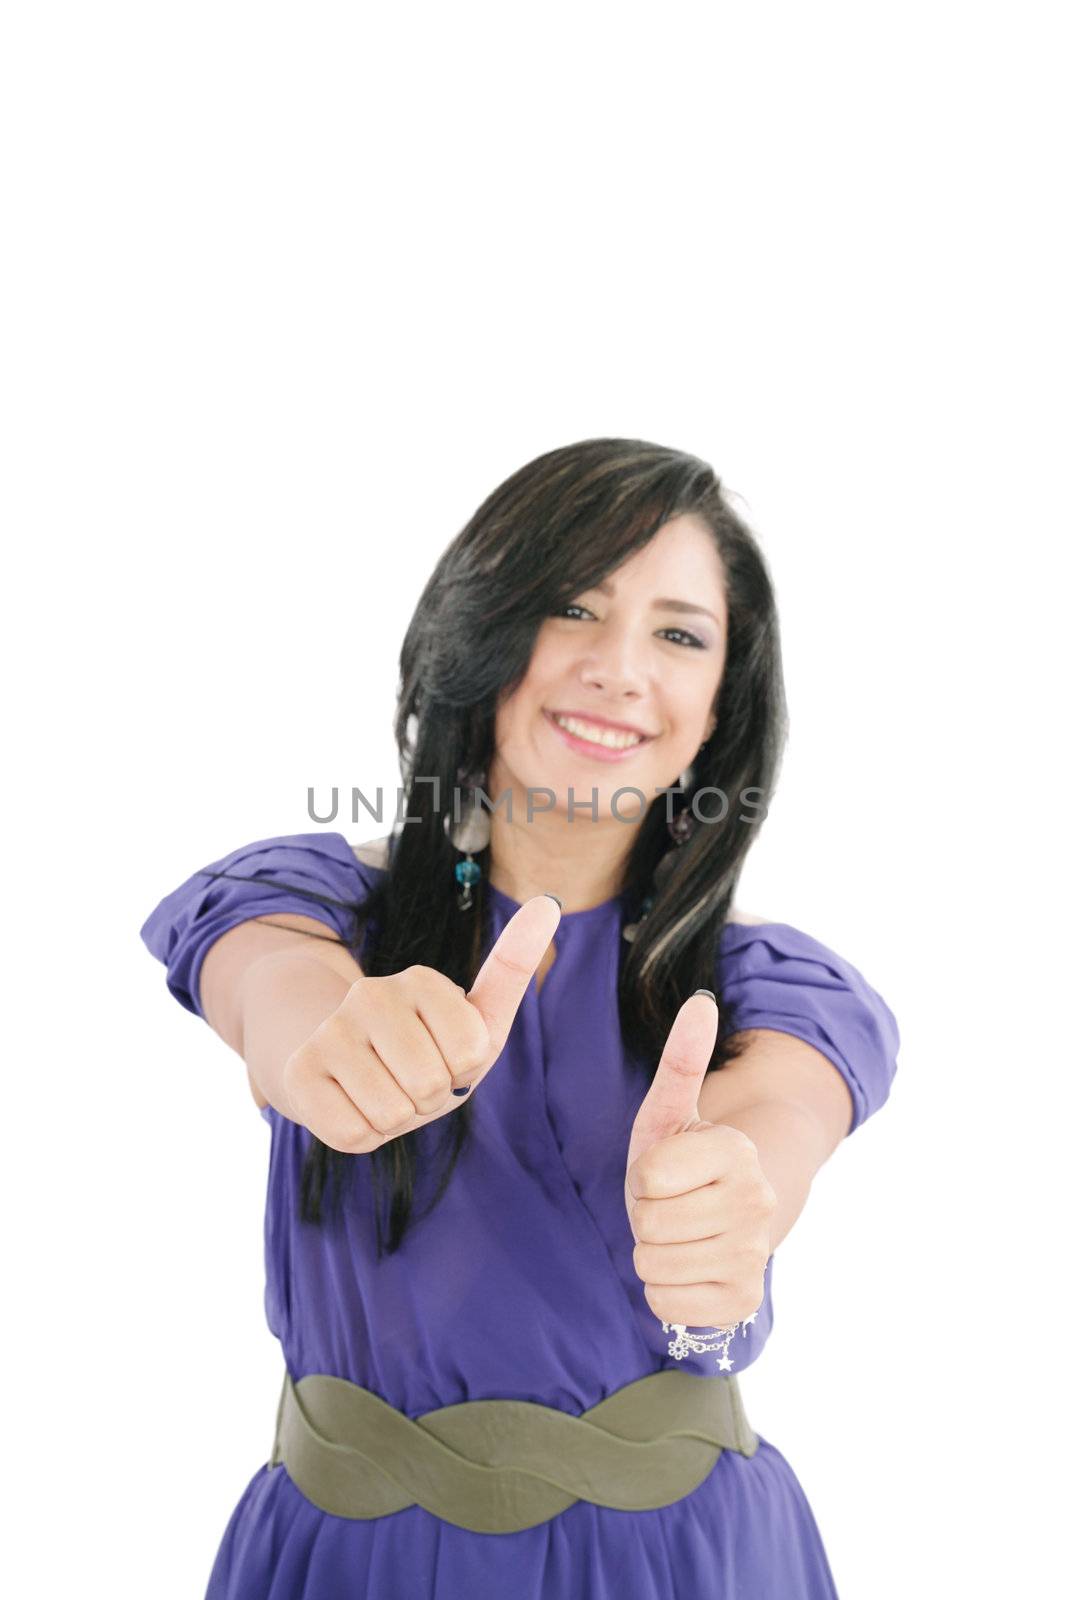 Smiling woman with thumbs up. Focus in the hands